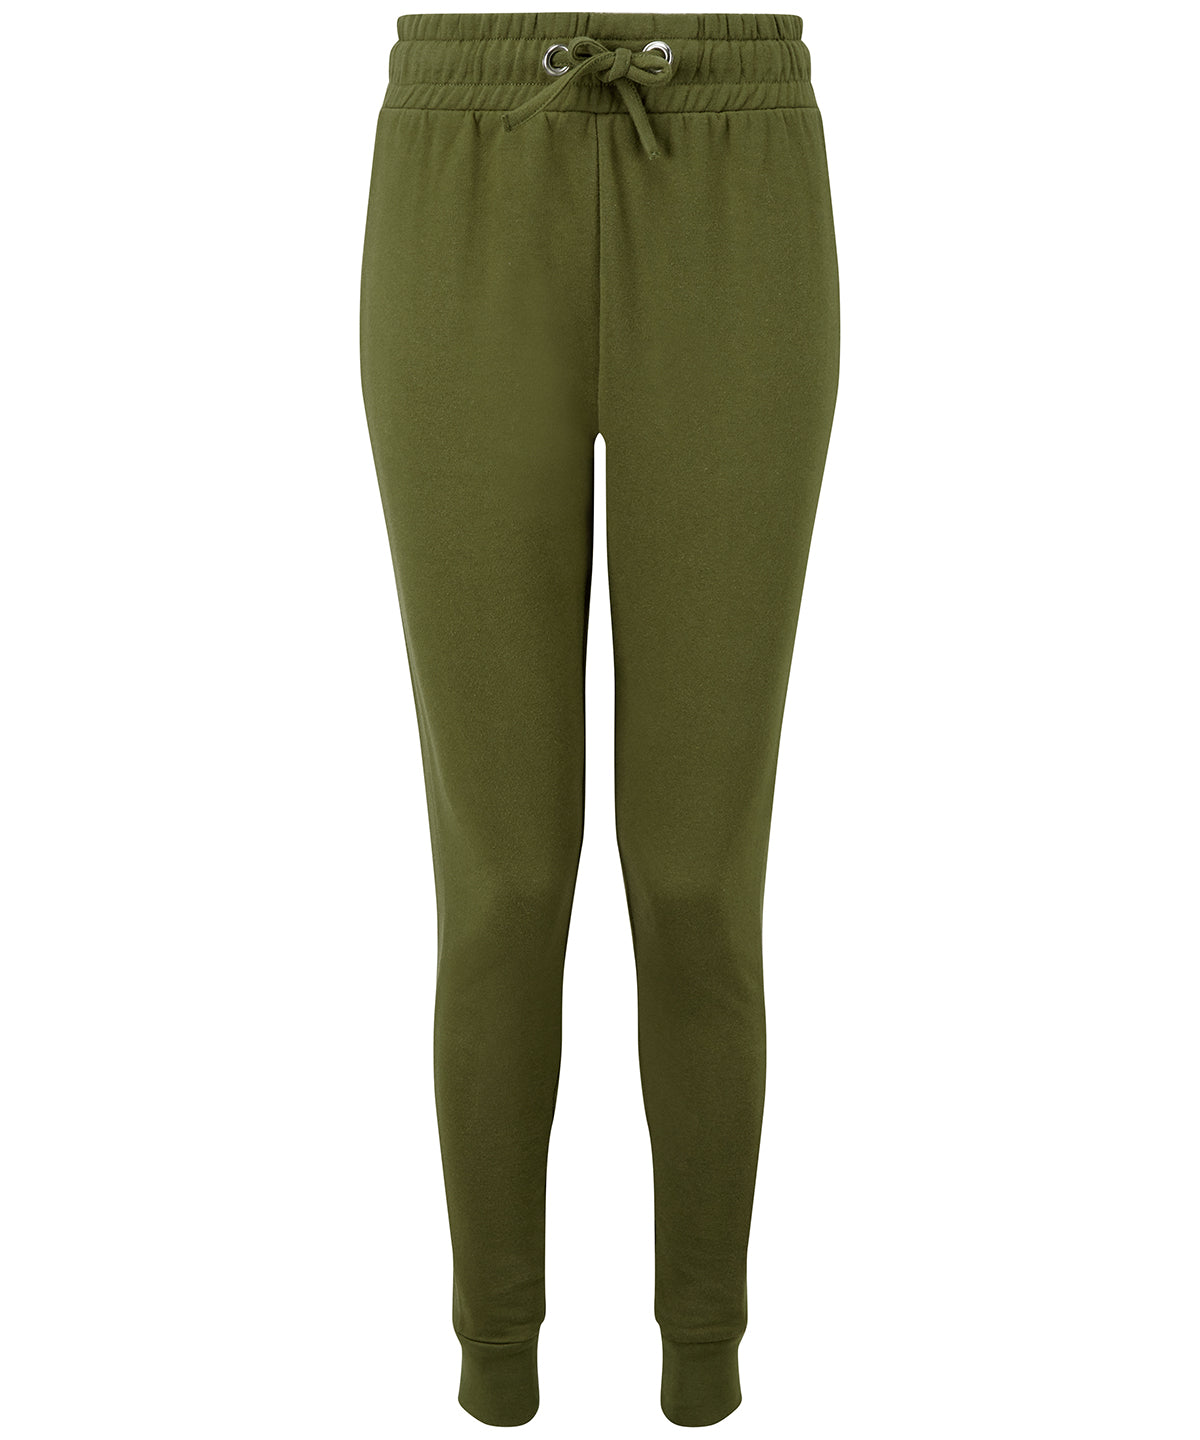 Olive - Women's TriDri® fitted joggers Sweatpants TriDri® Activewear & Performance, Co-ords, Exclusives, Home Comforts, Joggers, Leggings, Lounge Sets, Must Haves, On-Trend Activewear, Outdoor Sports, Rebrandable, Sports & Leisure, Tracksuits, Trending Loungewear Schoolwear Centres